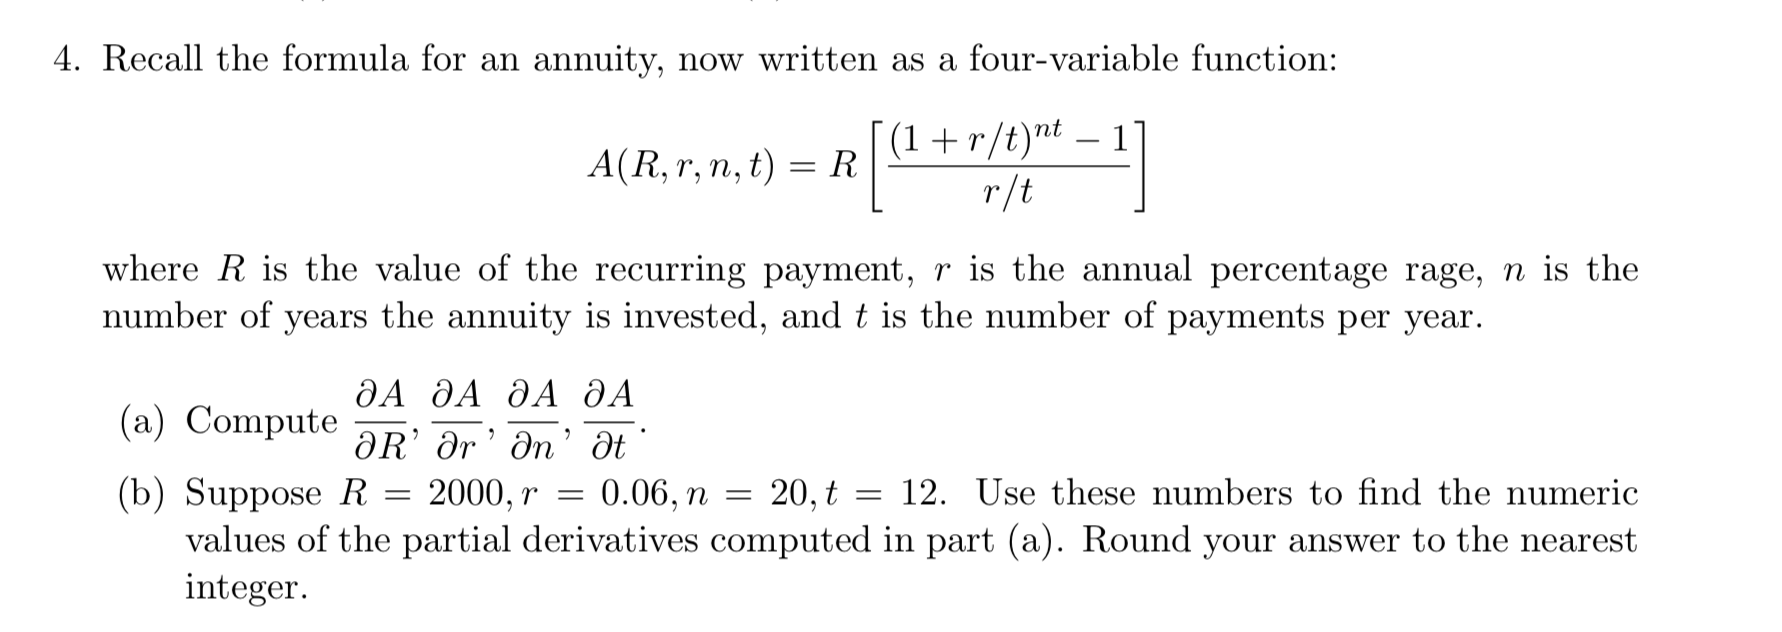 4. Recall the formula for an annuity, now written as a four-variable function:
A(R, r, n, t) = RI(1+r/tr-i
where R is the value of the recurring payment, r is the annual percentage rage, n is the
number of years the annuity is i ments per year.
, and t is the number of pay
ДА ДА ДА ДА
(a) Compute-R, Or, n. at
(b) Suppose R 2000, r-0.06, п-20.ț
12. Úse these numbers to find the numeric
values of the partial derivatives computed in part (a). Round your answer to the nearest
integer
